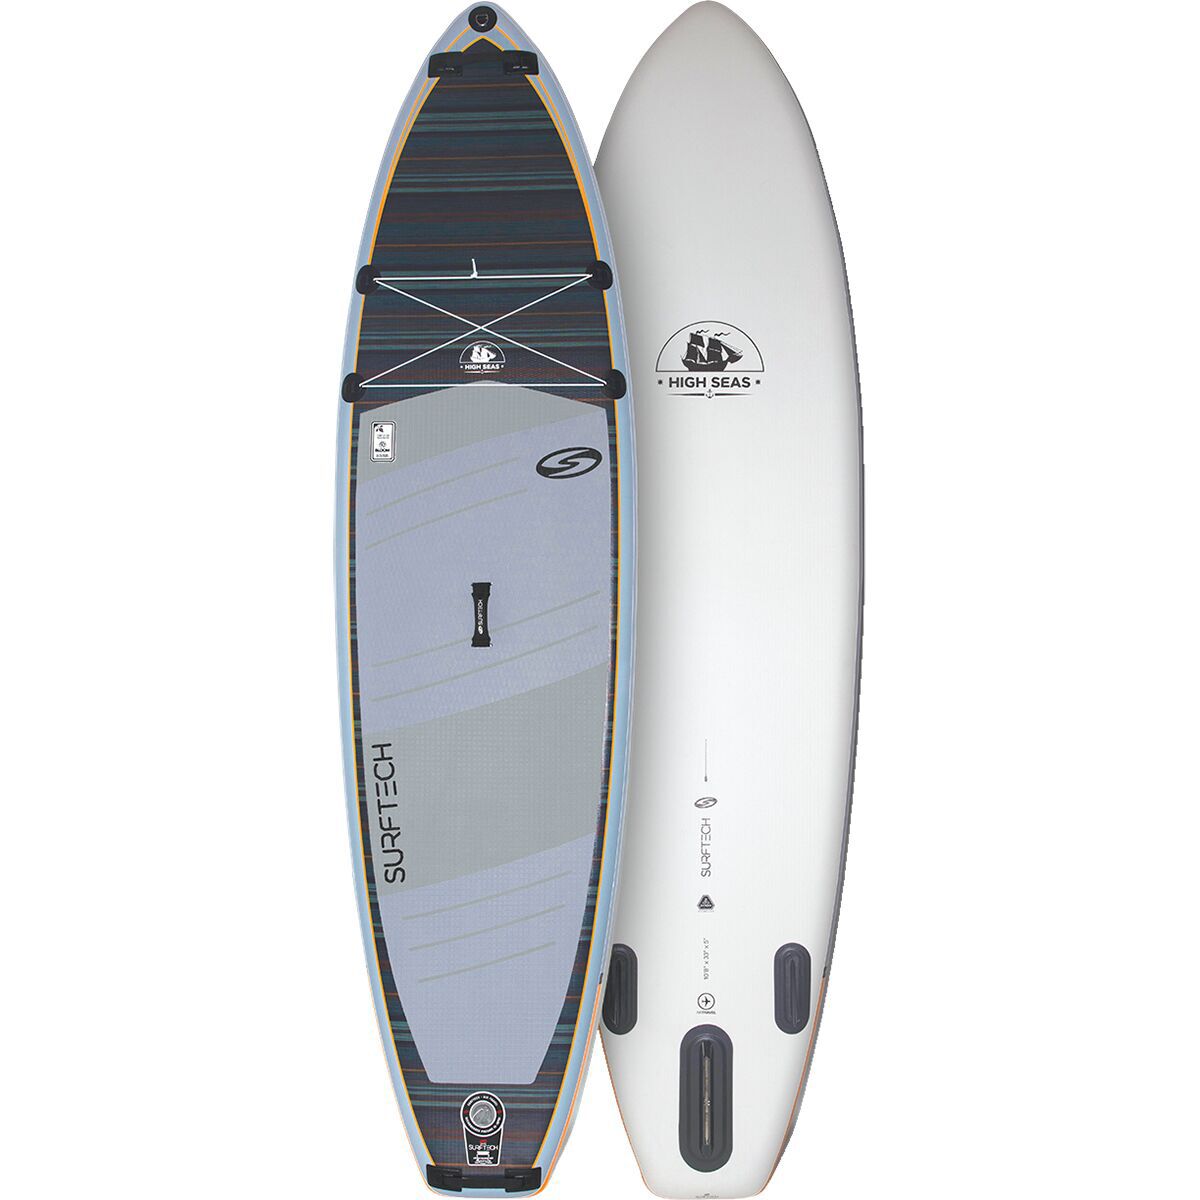 Surftech x Prana Air Travel High Seas Inflatable Stand-Up Paddleboard